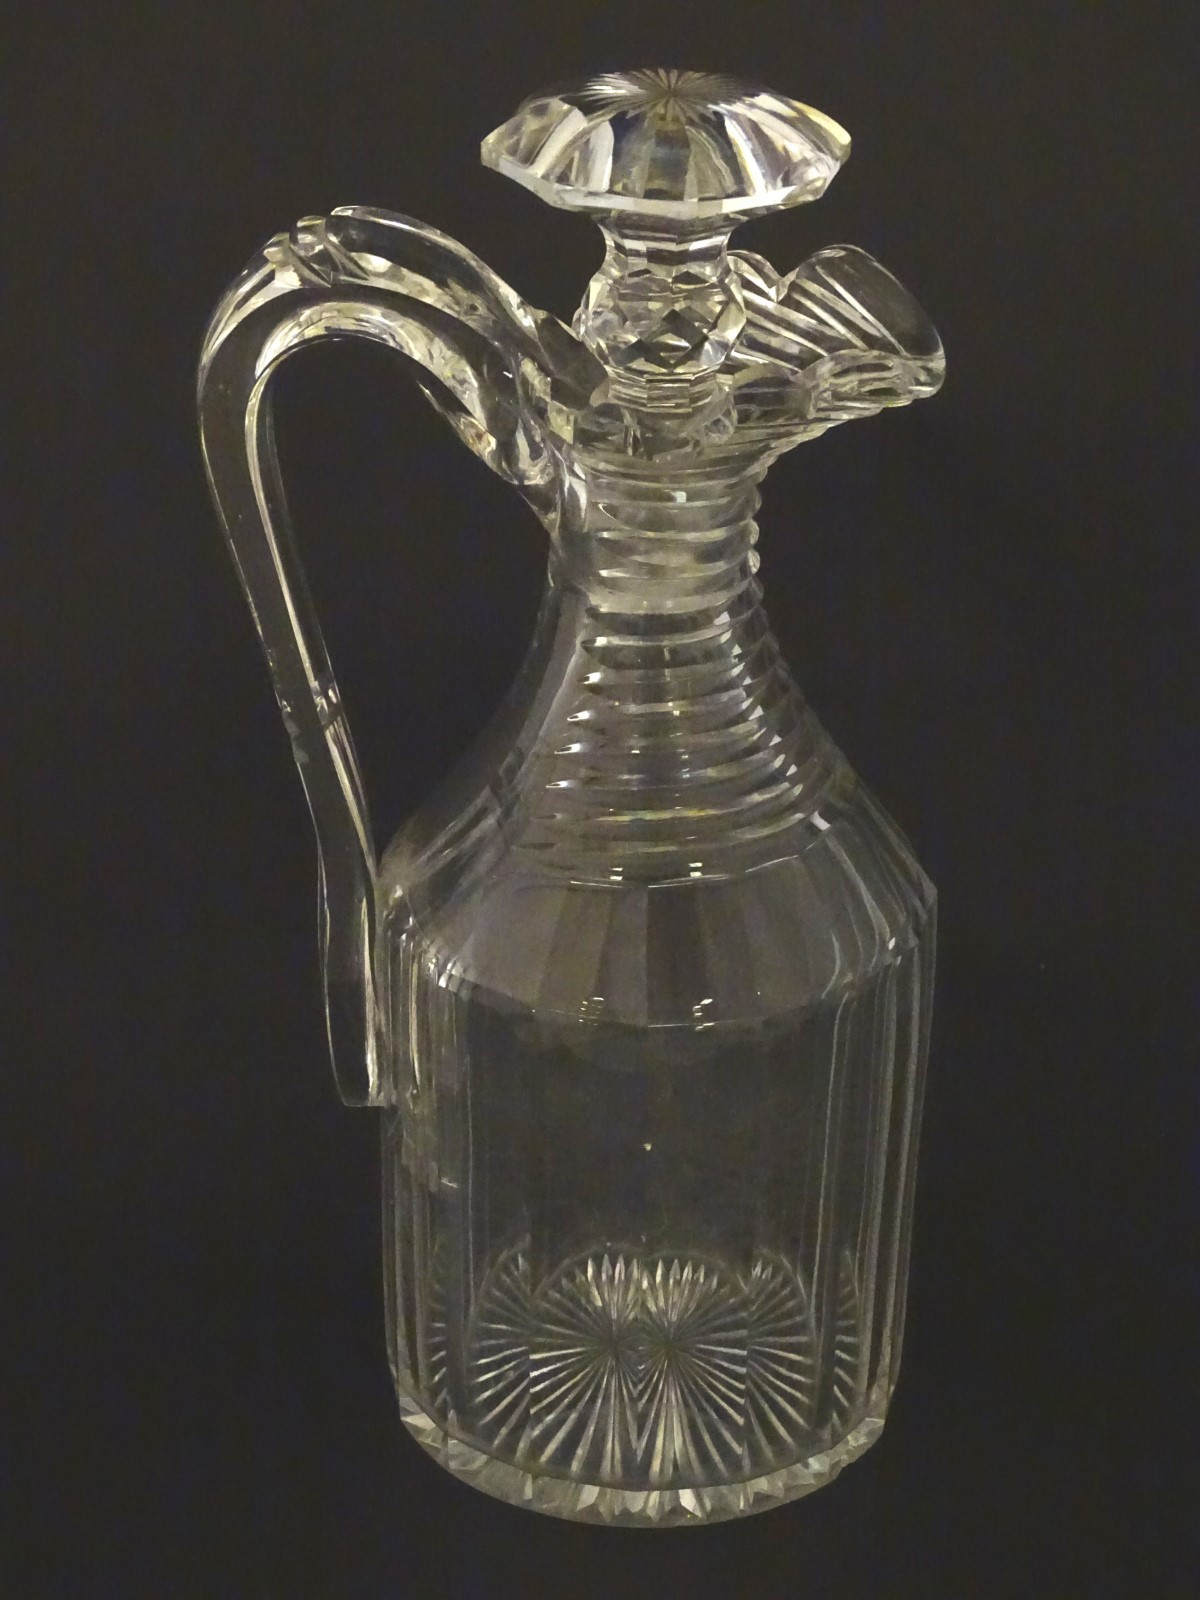 A 19thC Irish cut glass decanter and stopper, having a panelled body with ribbed neck,